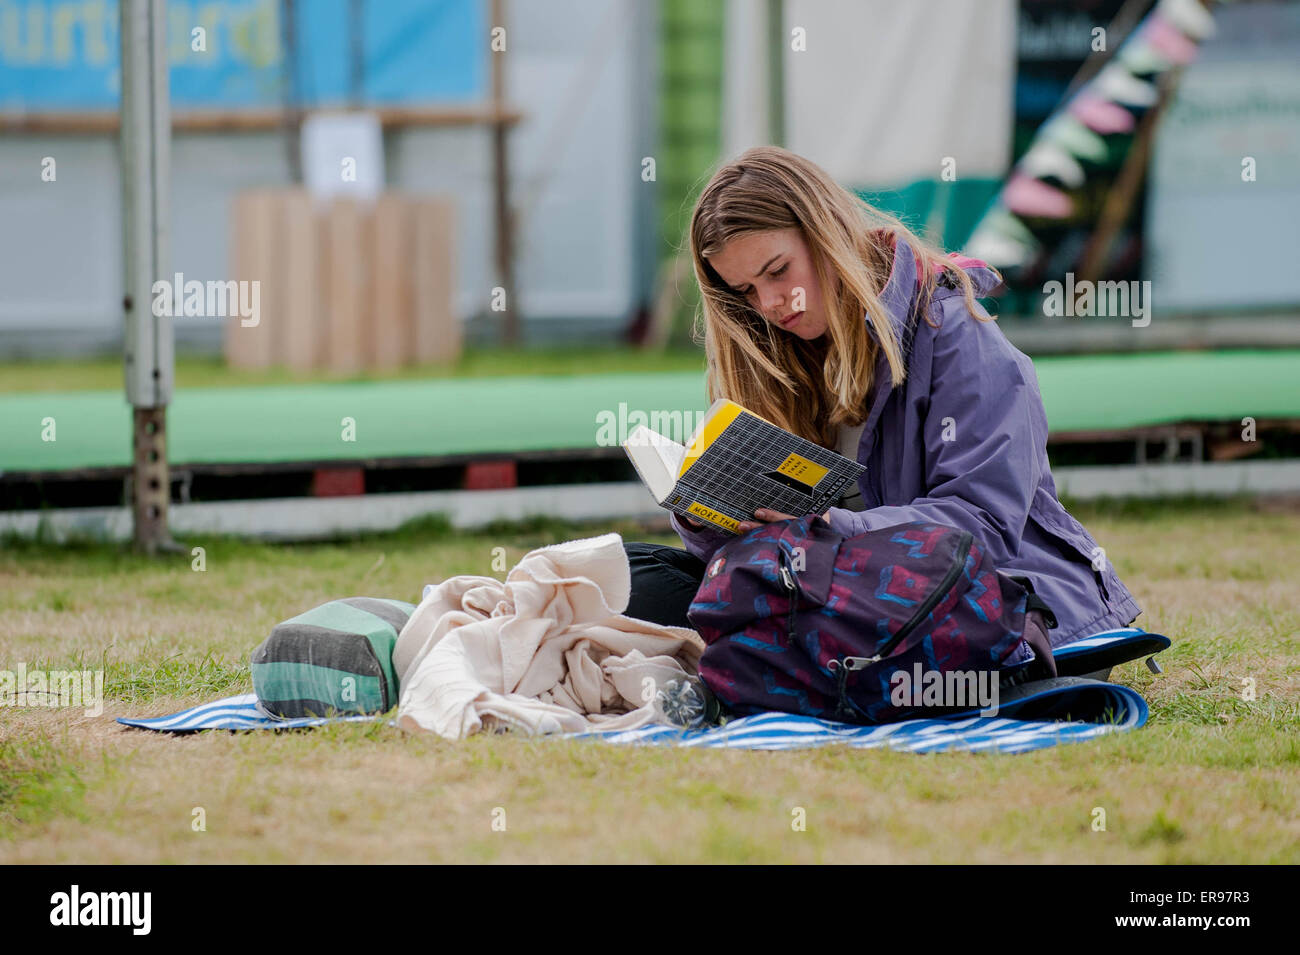 Hay on Wye, UK. Thursday 28 May 2015  Pictured: A young girl sits on the grass  while reading a book  at the Hay Festival RE: The Hay Festival takes place in Hay on Wye, Powys, Wales Stock Photo